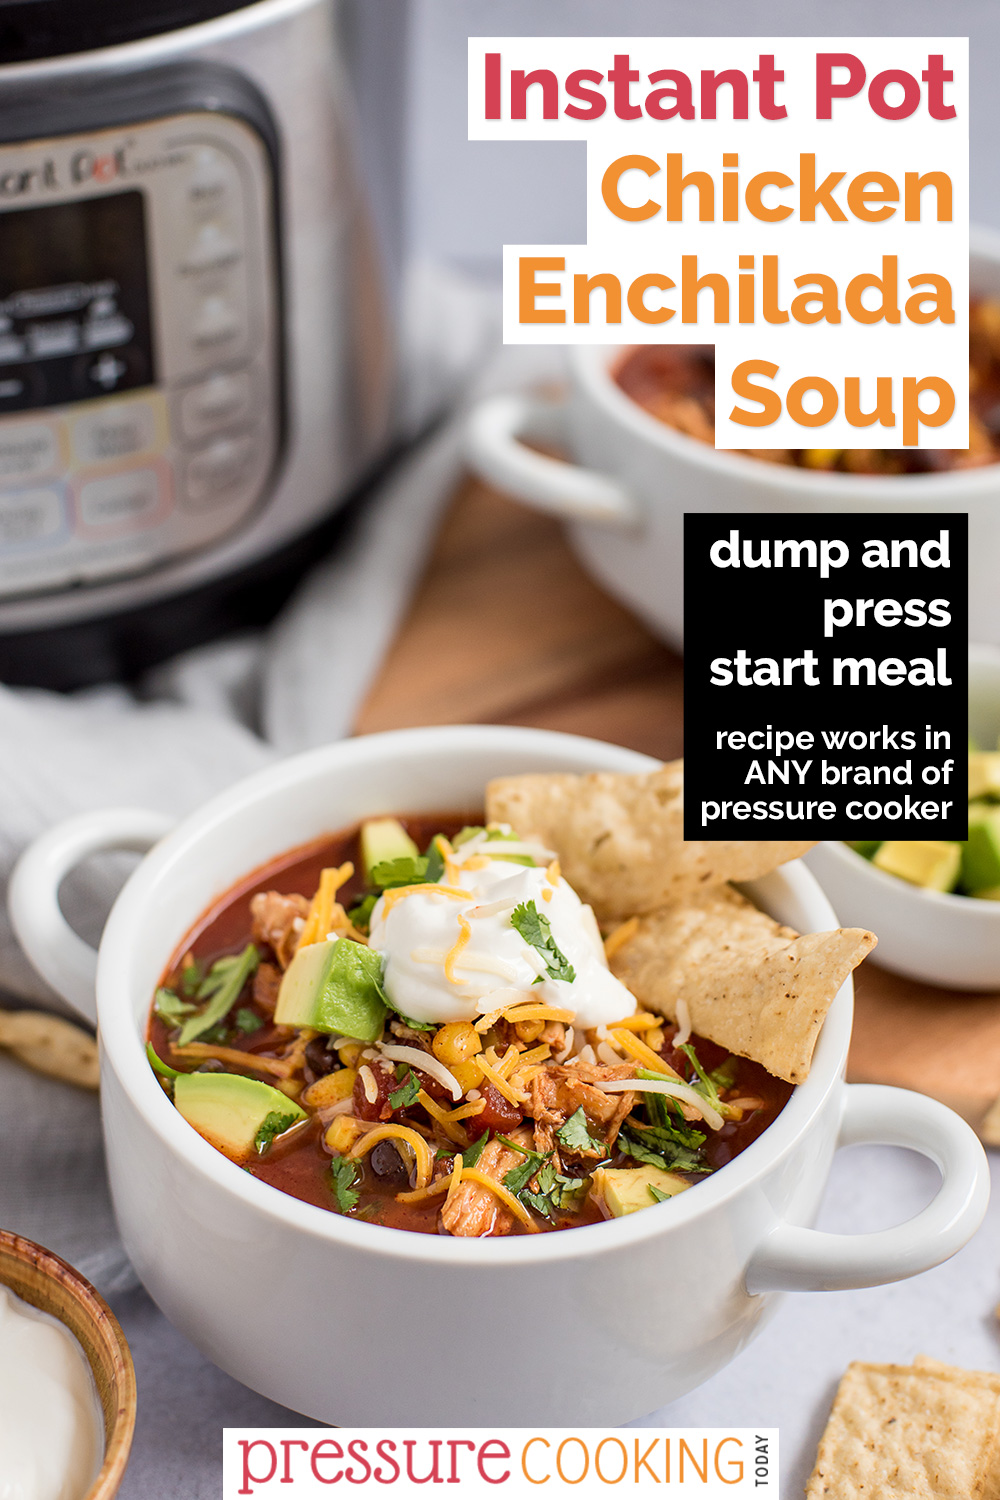 Pinterest image promoting Instant Pot Chicken Enchilada Soup with a black text box that reads "dump and press start meal, recipe works in any brand of pressure cooker" overlaid on a photo with a white soup bowl loaded with red soup, topped with avocado, shredded cheese, sour cream, cilantro, and garnished with tortilla strips, with an Instant Pot visible in the upper left background via @PressureCook2da